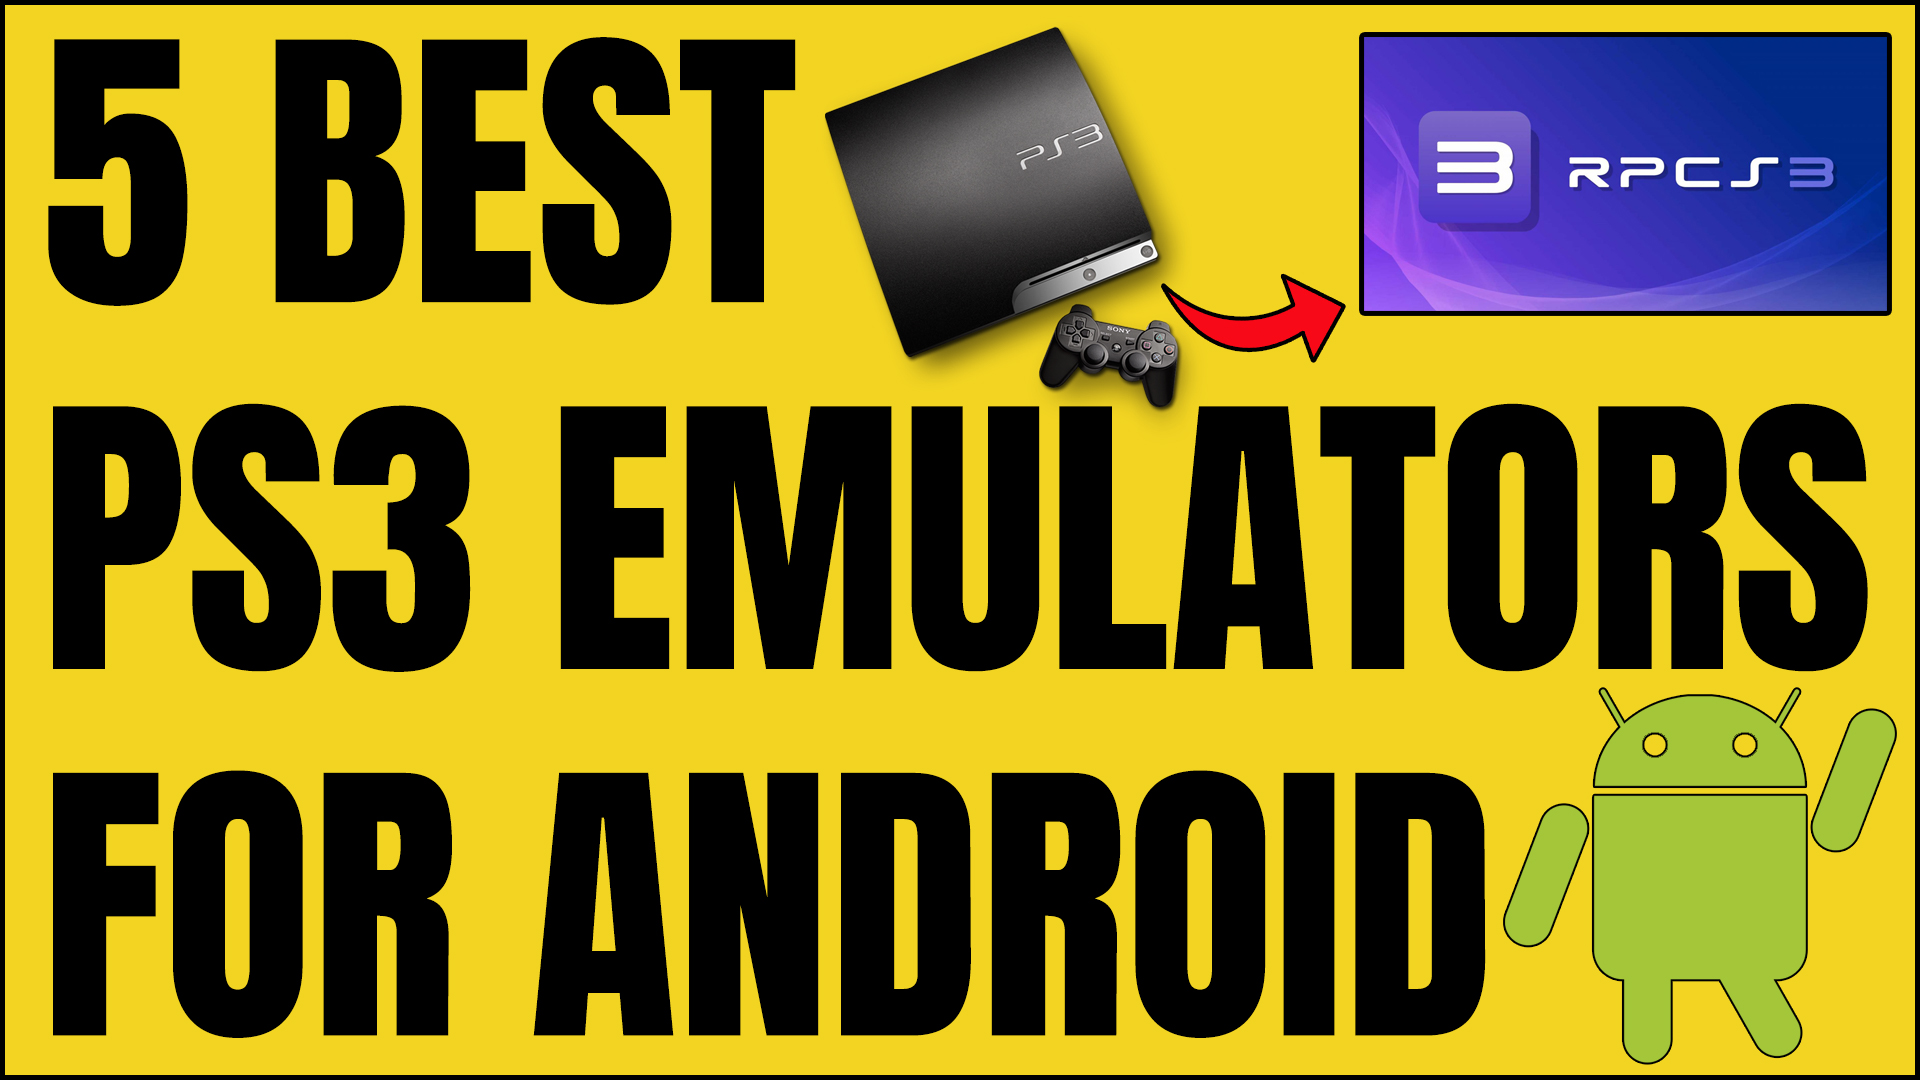 5 Best PS3 Emulators For Android